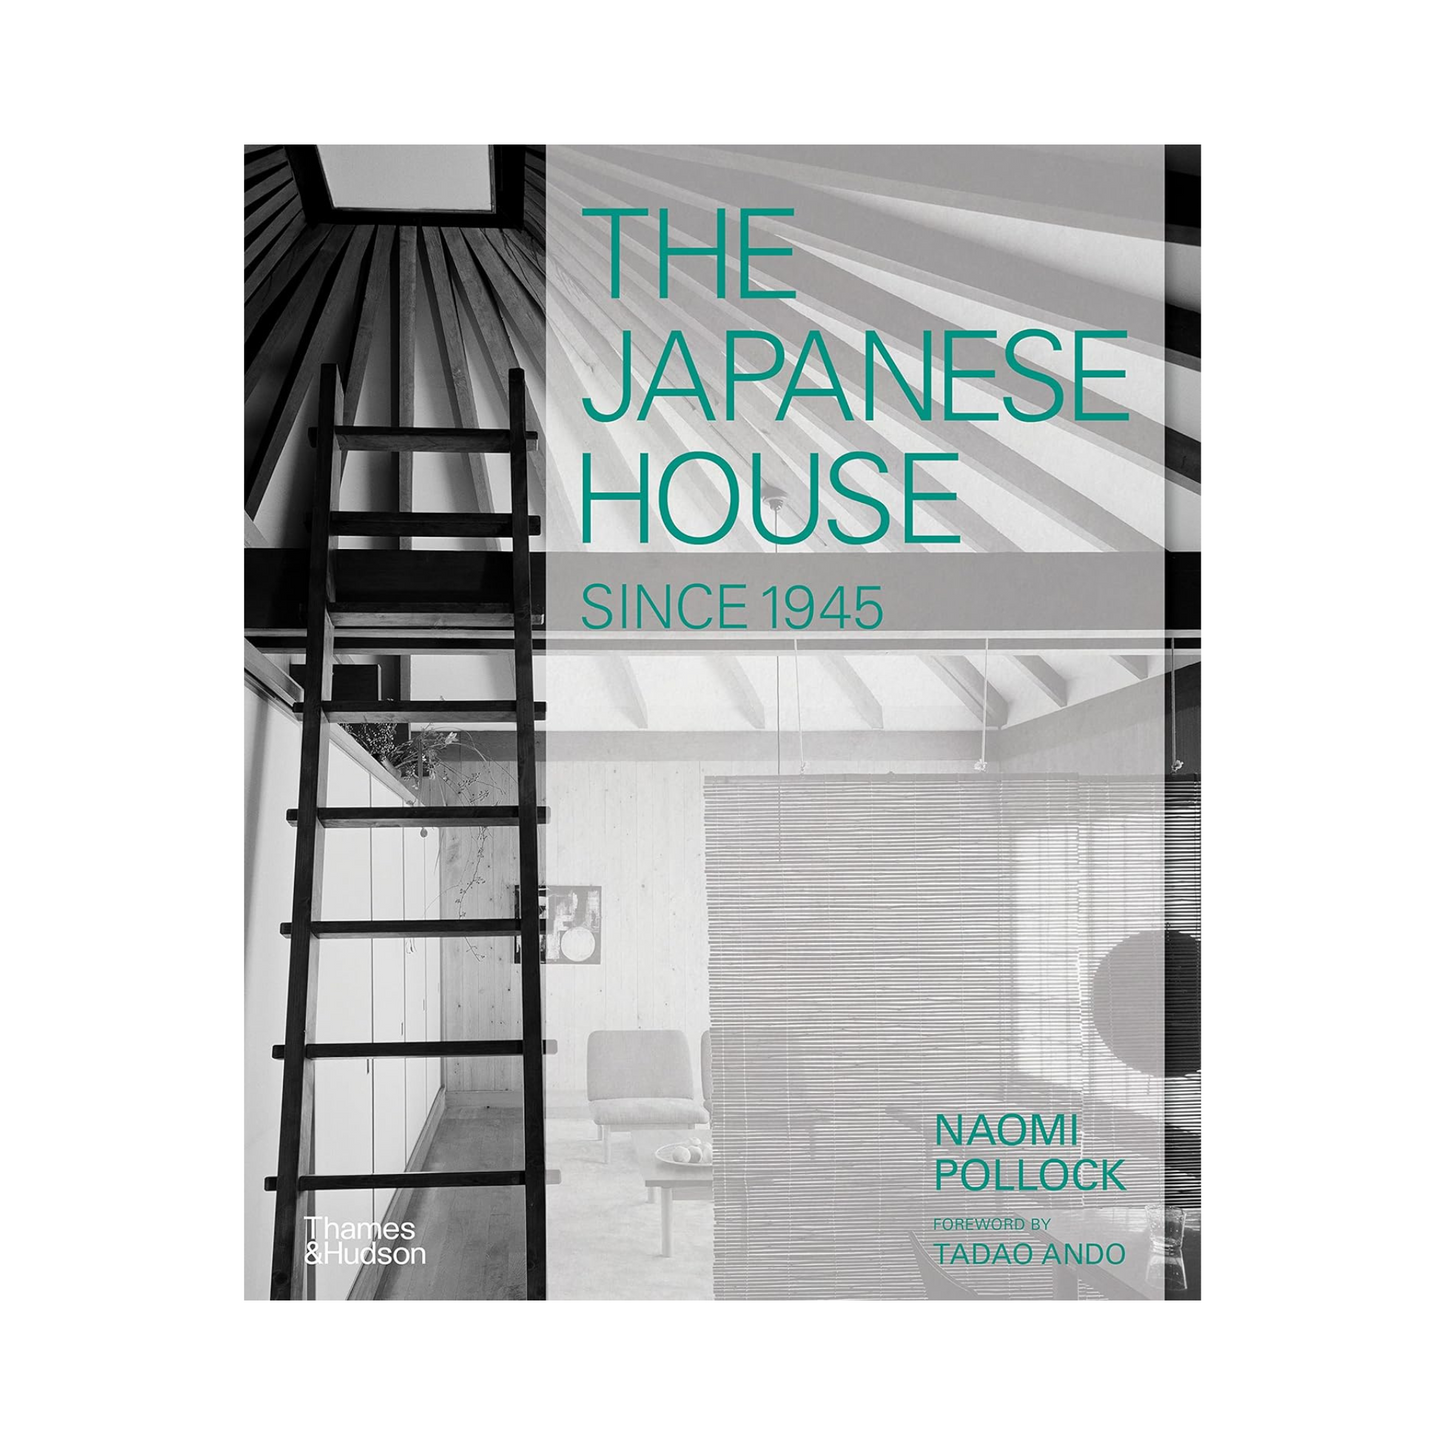 The Japanese House Since 1945